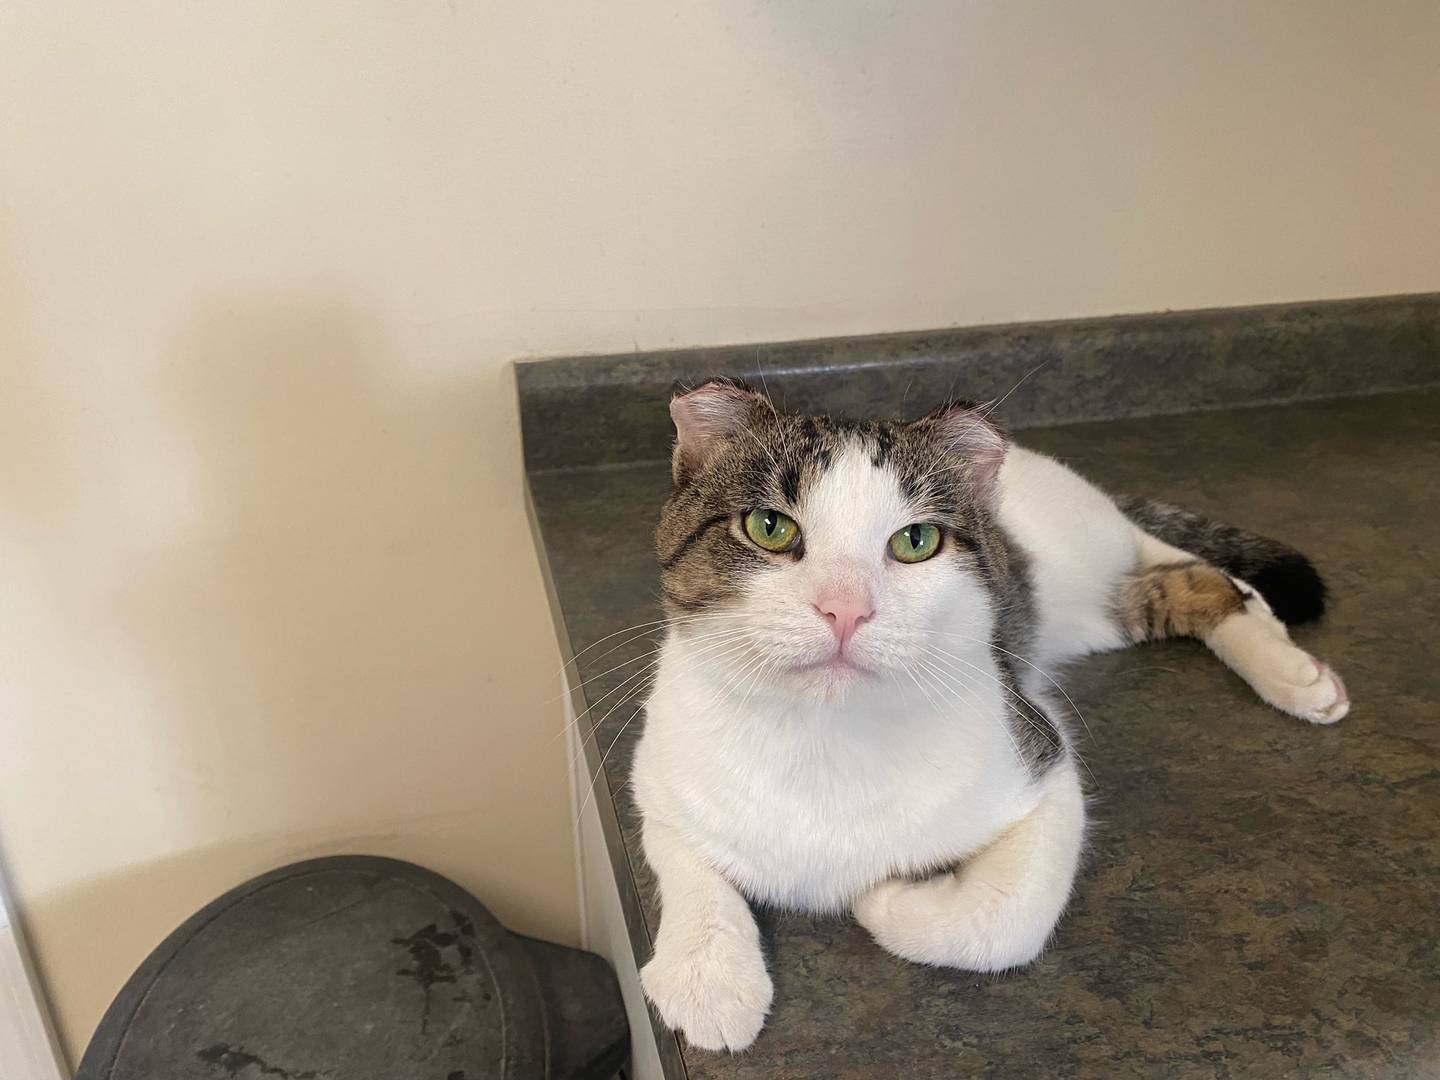 Donvito is a one-year-old tabby. He is super loving and playful. He likes hugs and is good with other cats. For more information on Donvito, including adoption fees please visit justanimals.org or call 815-448-2510.